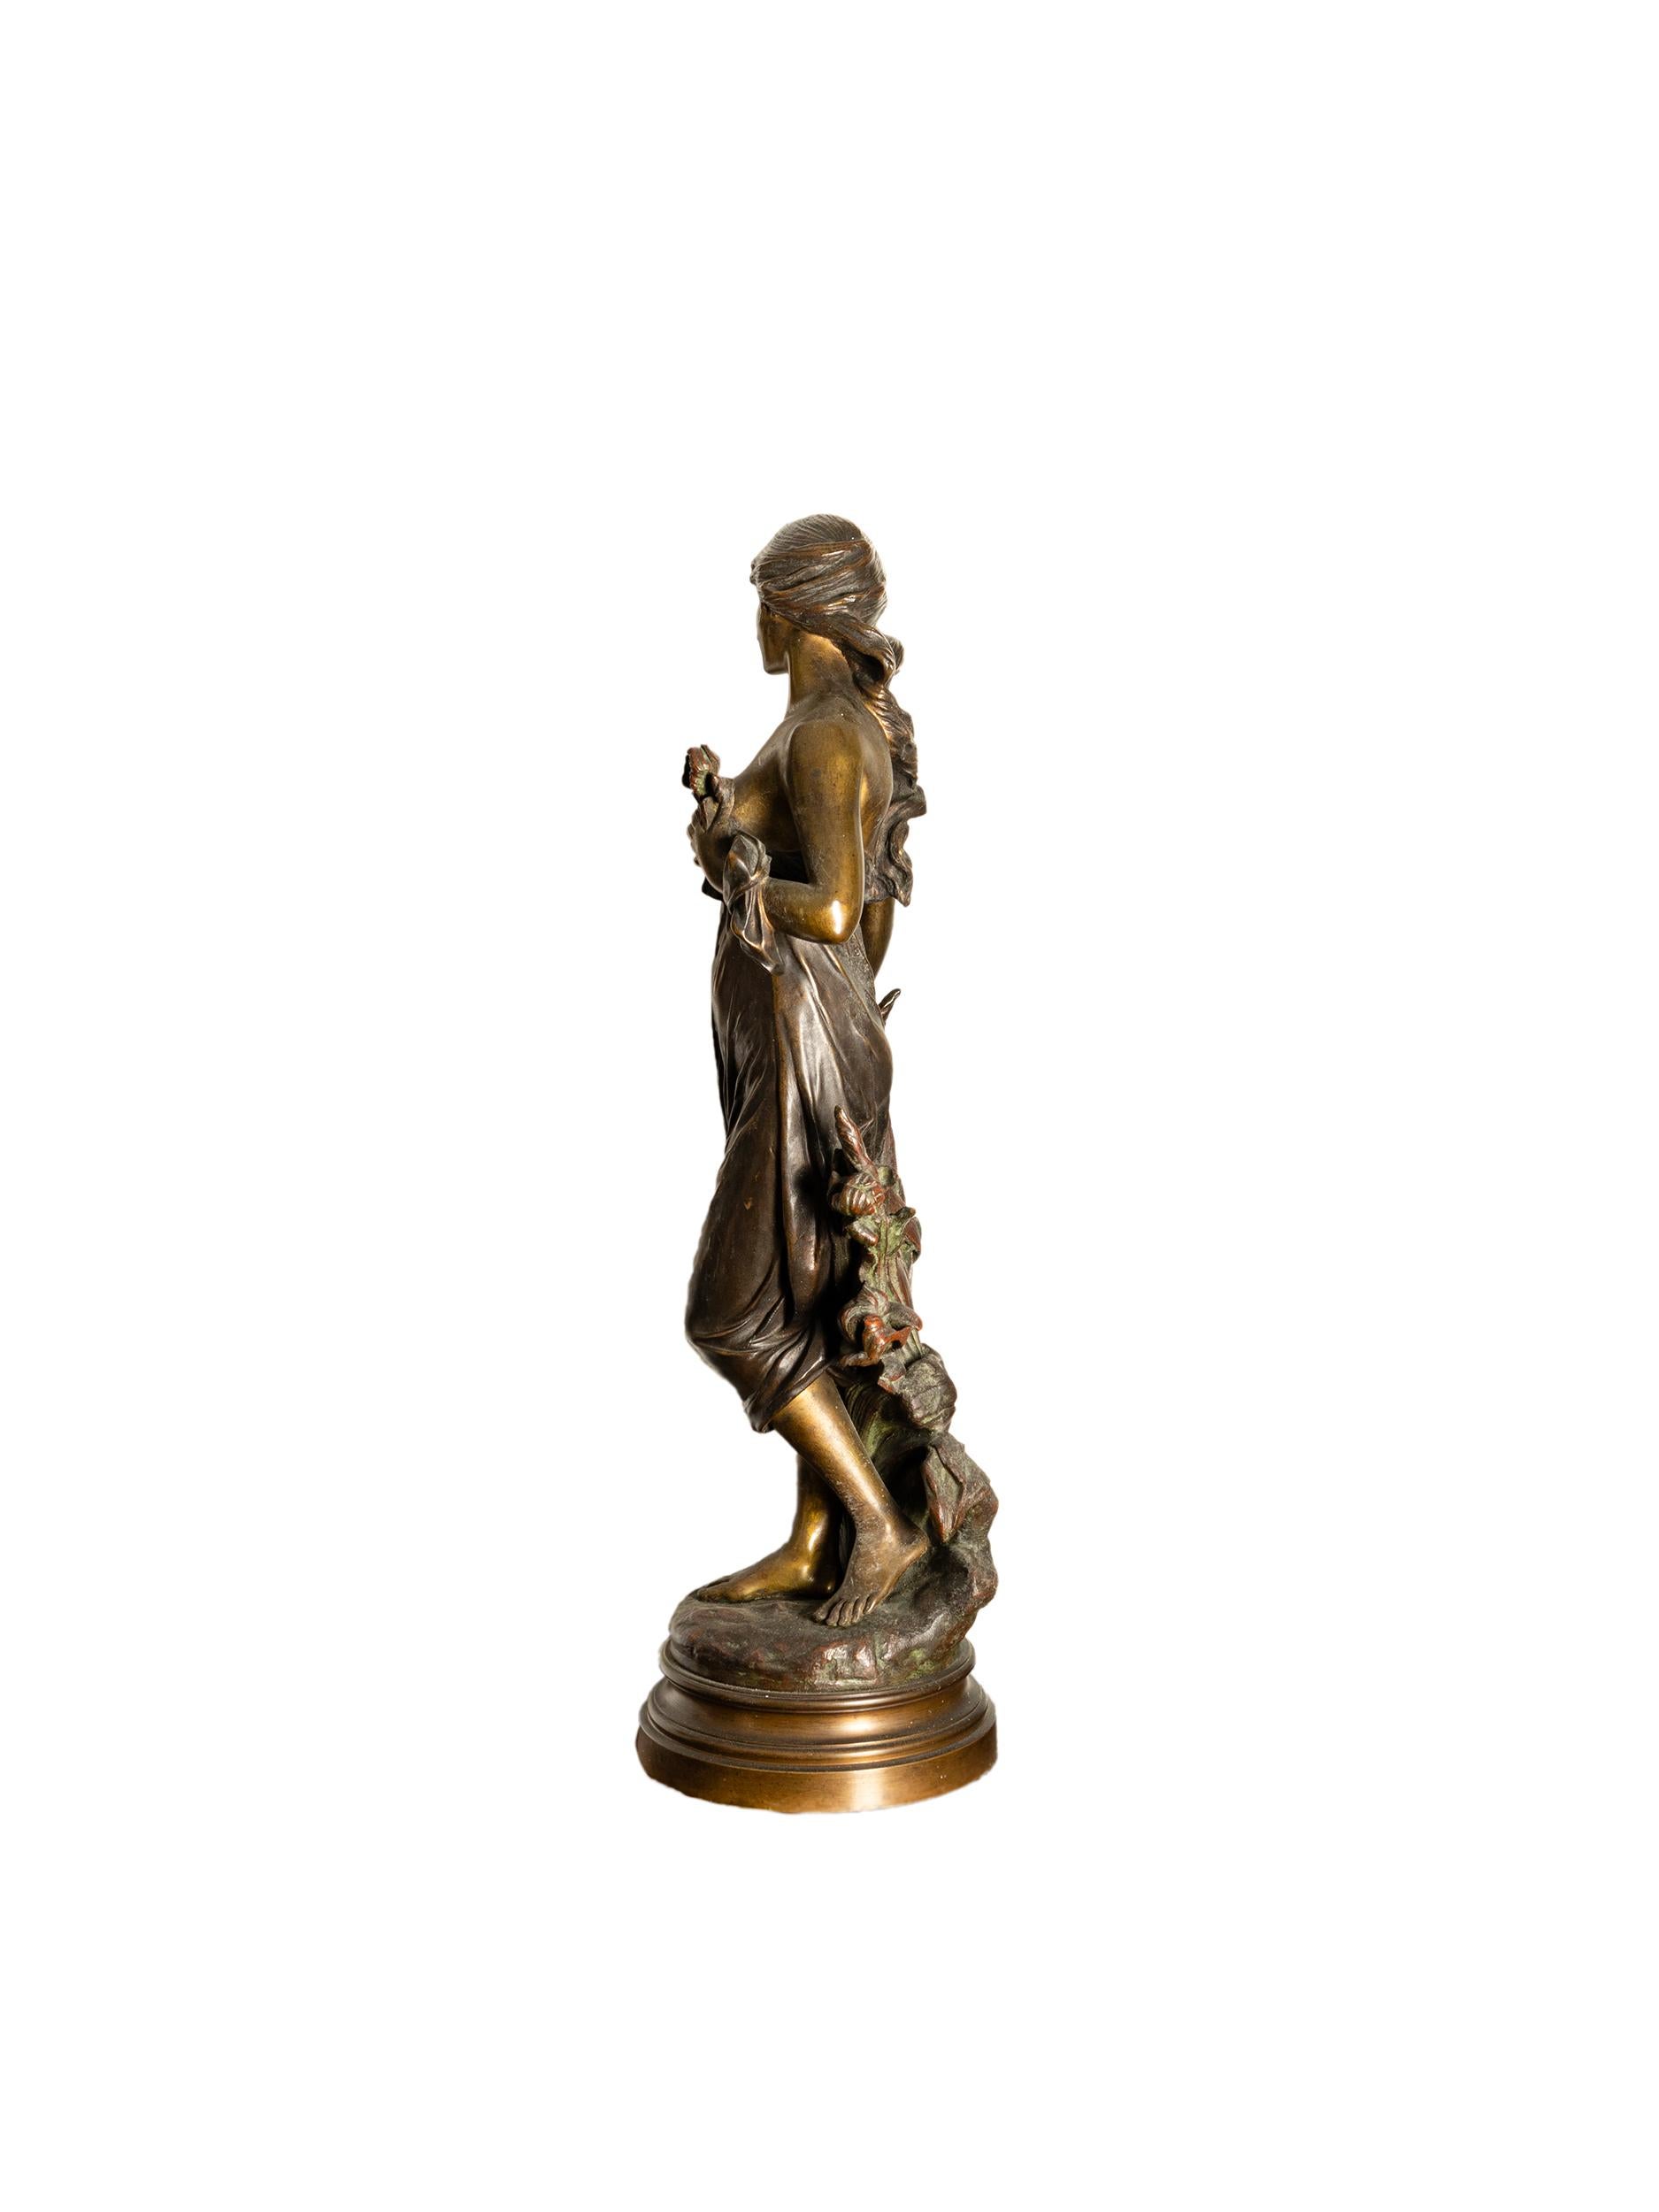 A patinated bronze figurine of the roman goddess of the Hunt Diana by the great artist Edouard Drout.
